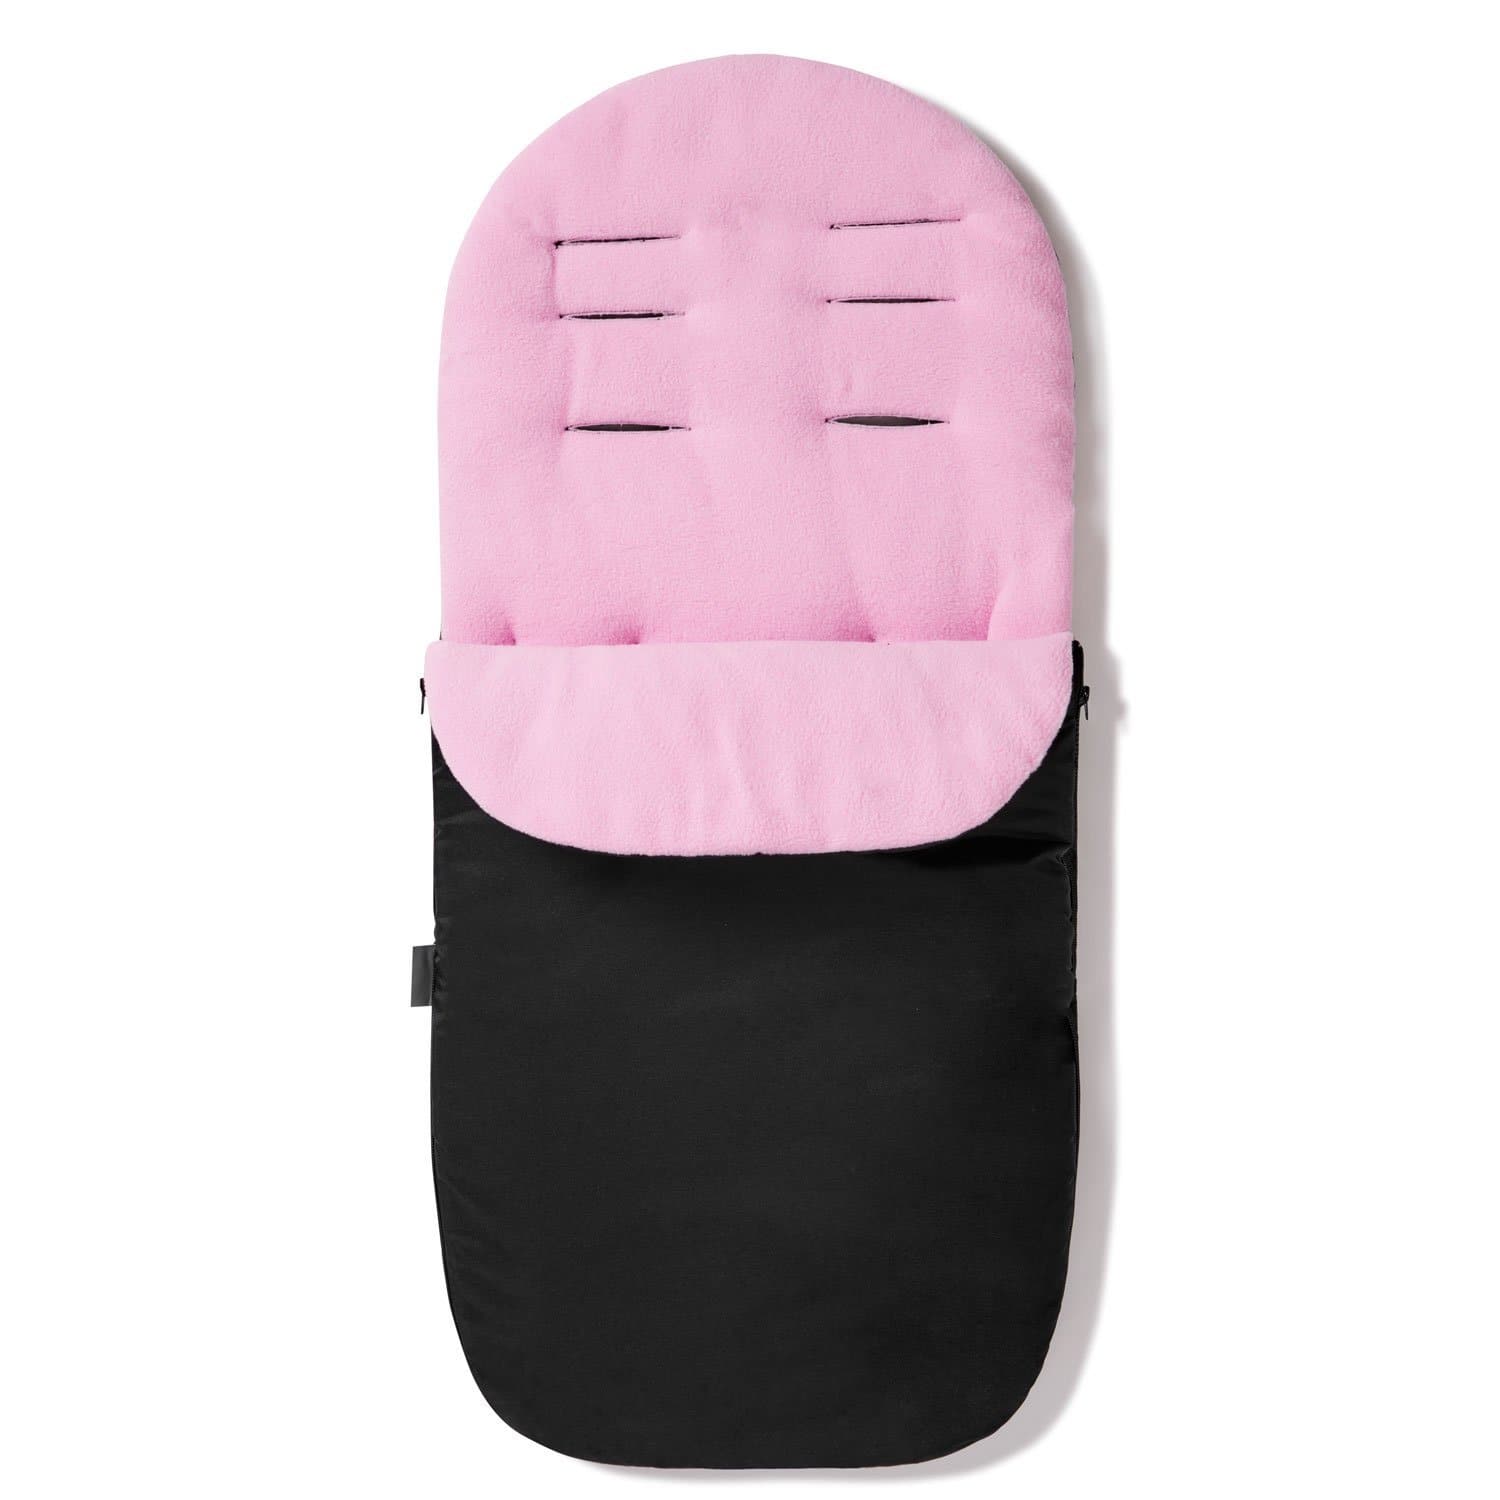 Footmuff / Cosy Toes Compatible with Kinderkraft - Light Pink / Fits All Models | For Your Little One